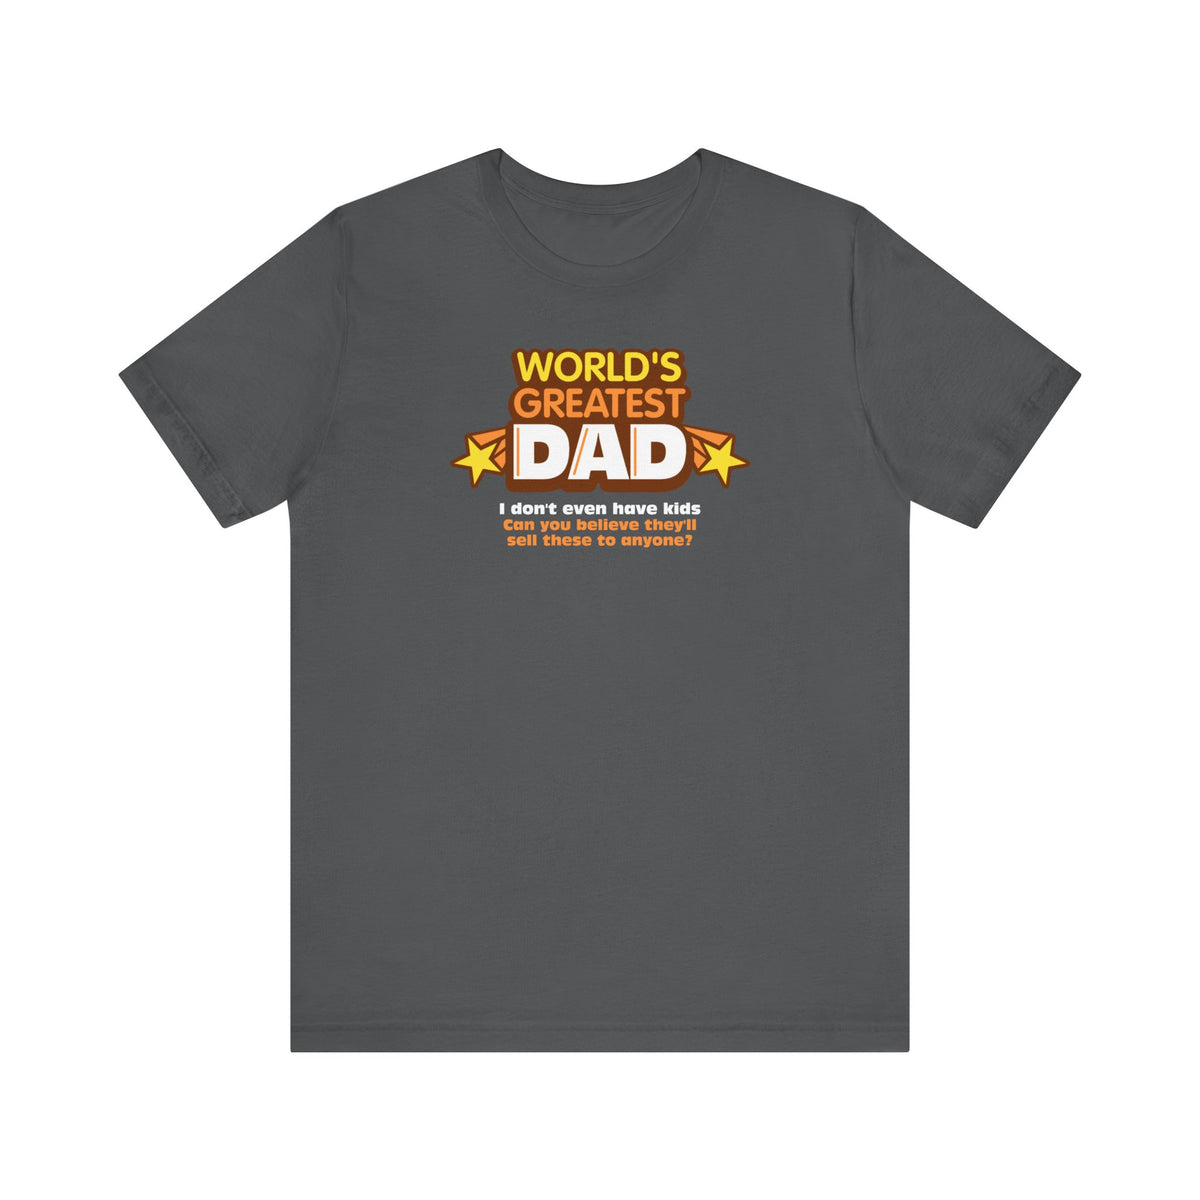 World's Greatest Dad - I Don't Even Have Kids. Can You Believe They'll Sell These To Anyone? -Men's T-Shirt